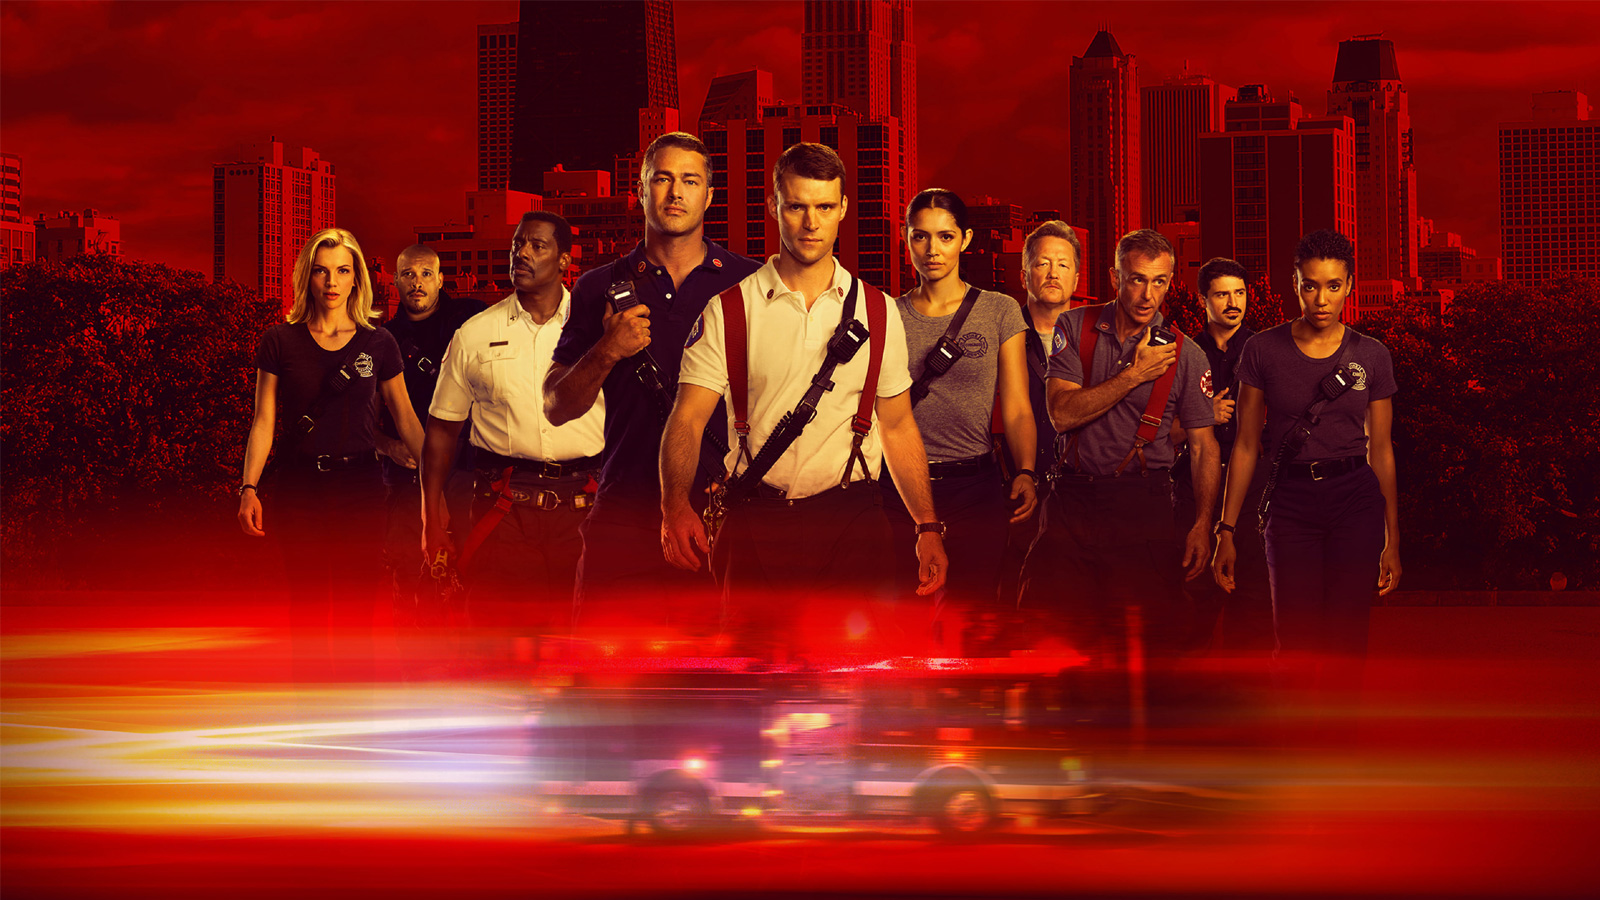 Chicago Fire : Buckle Up